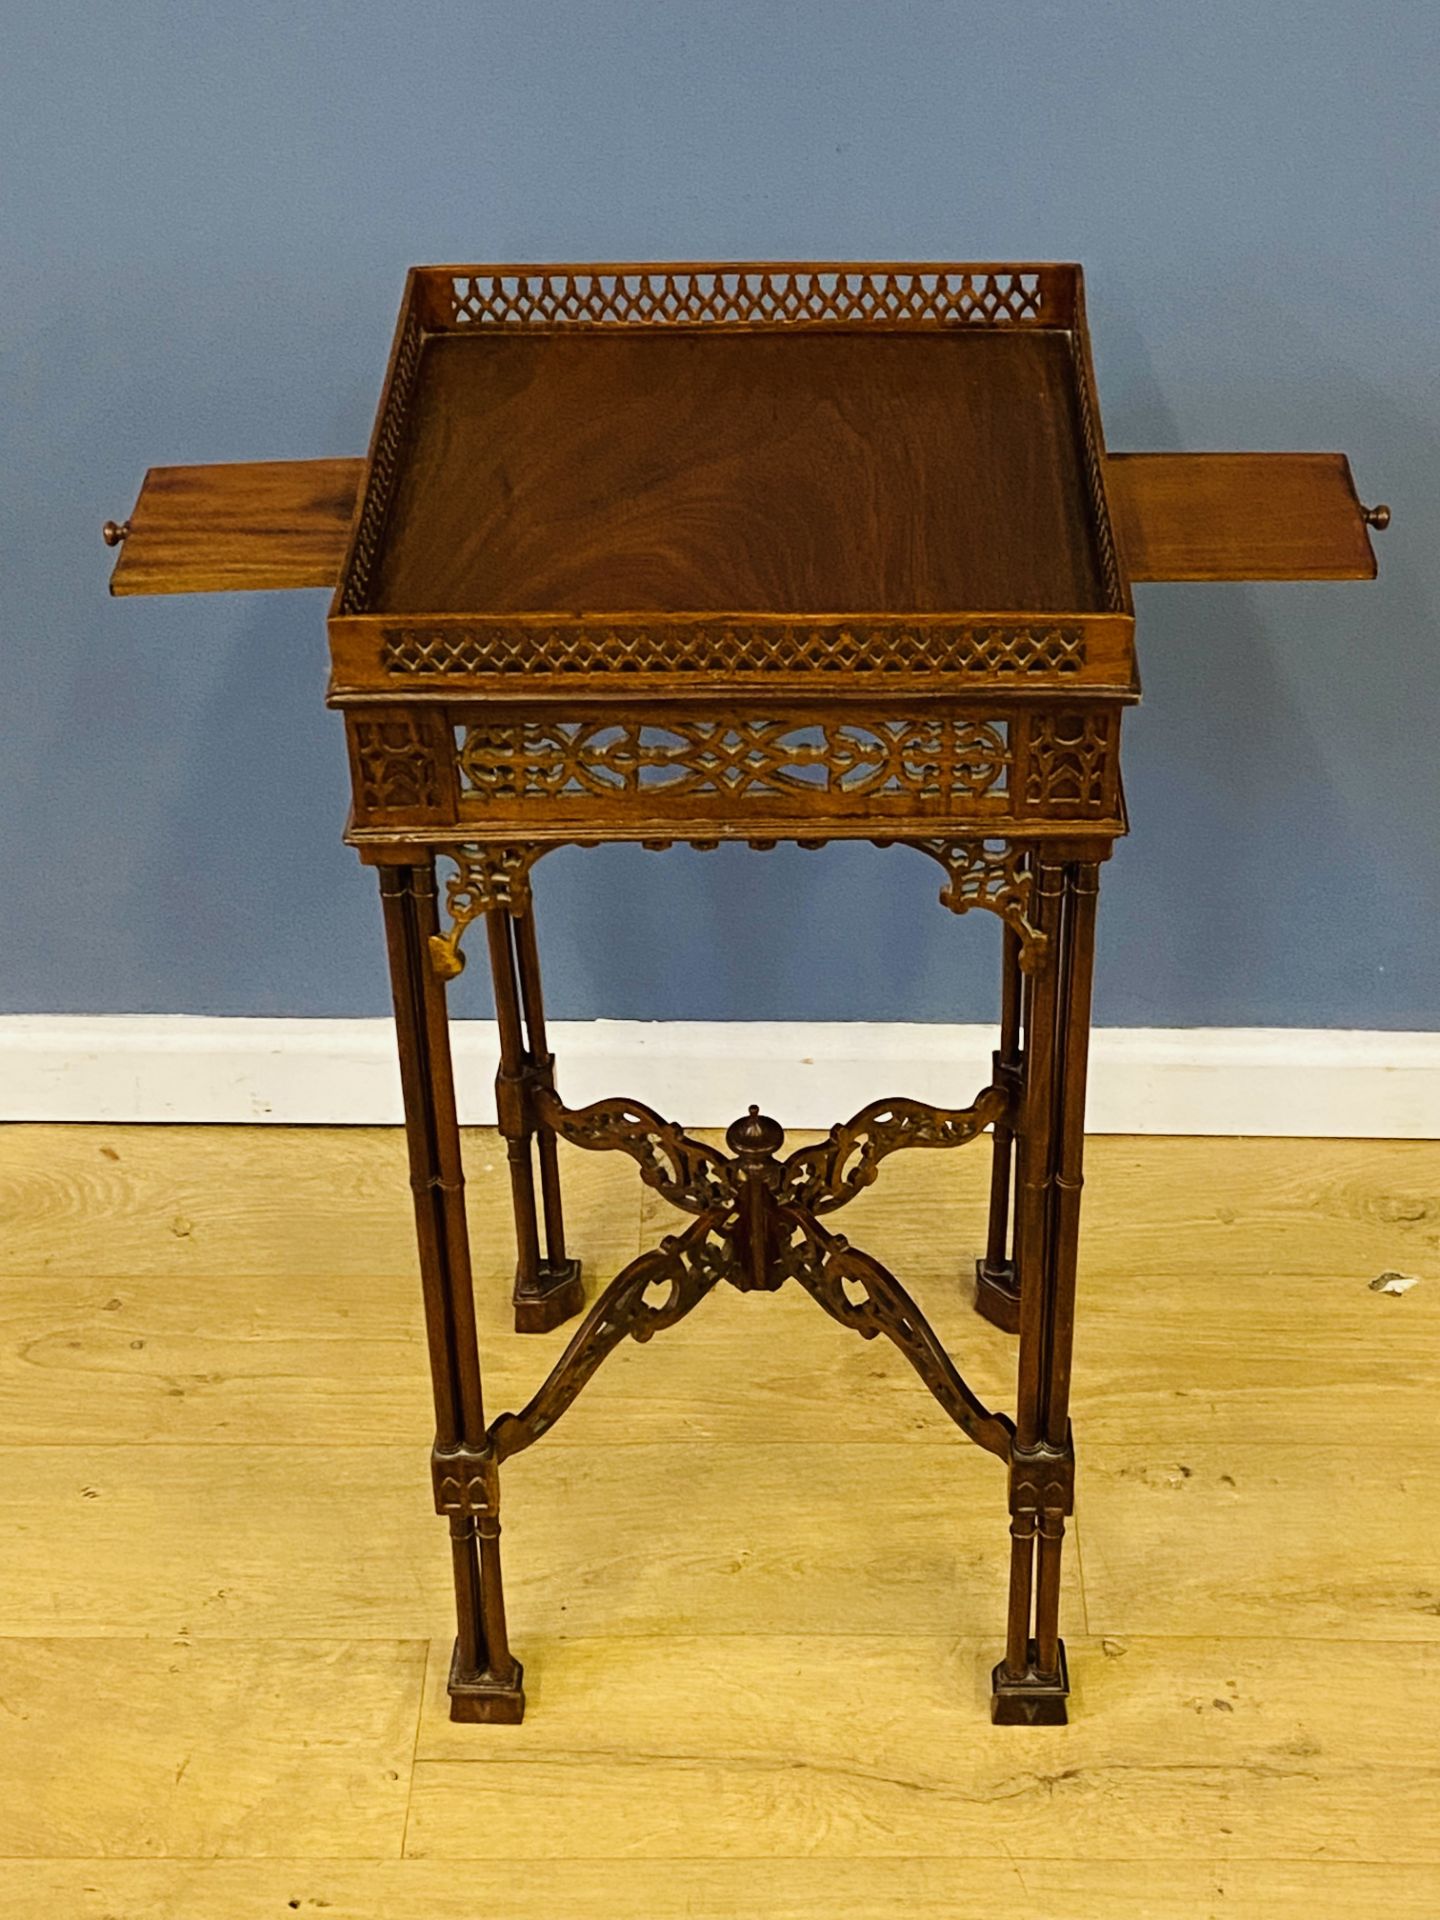 Reproduction Chippendale style mahogany urn stand - Image 4 of 6